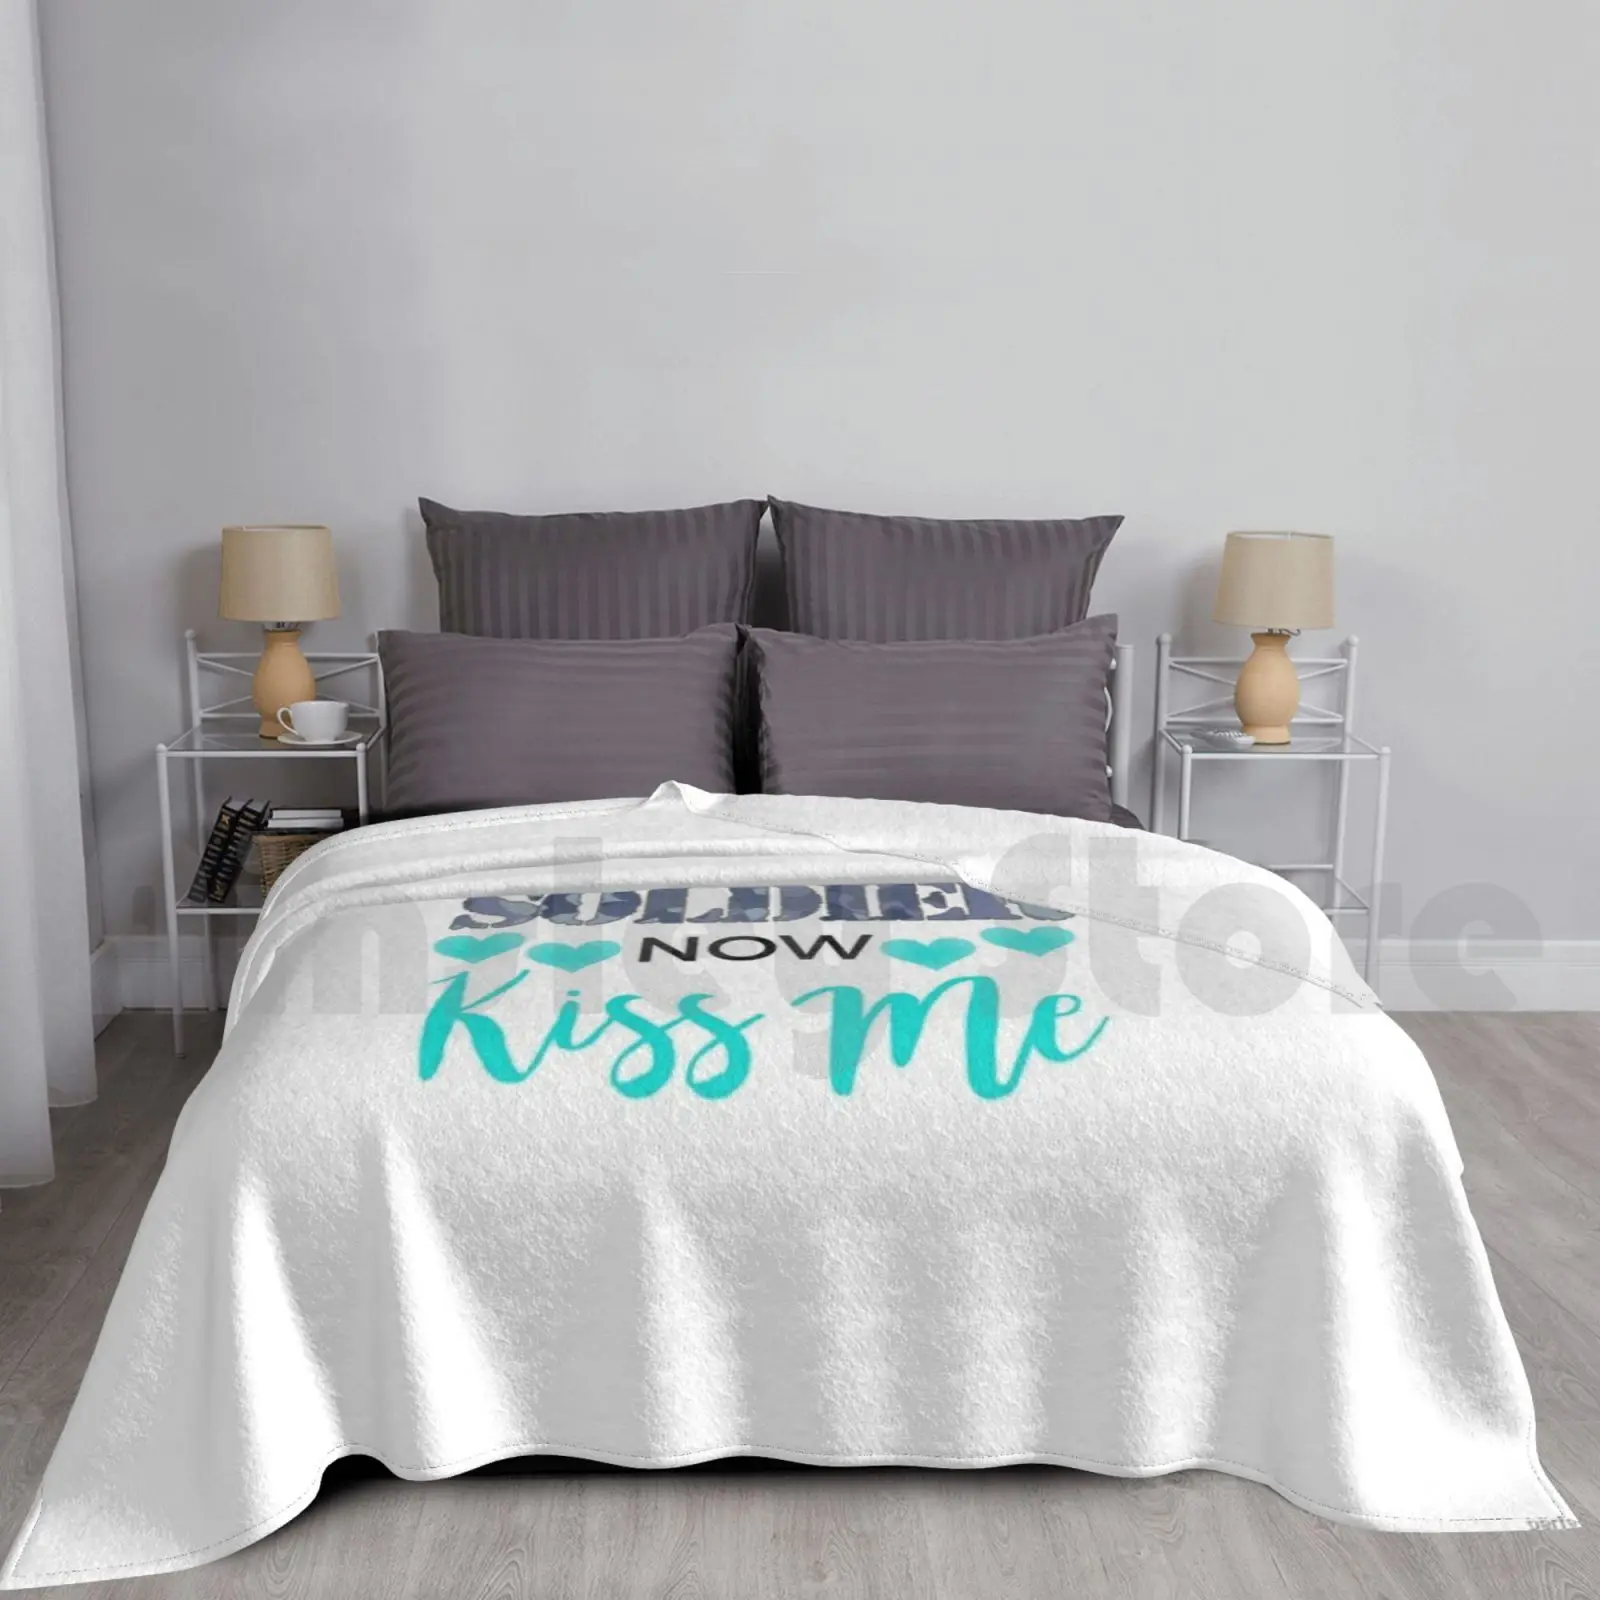 

Welcome Home Soldier Now Kiss Me Deployment Blanket For Sofa Bed Travel Welcome Home Soldier Now Kiss Me